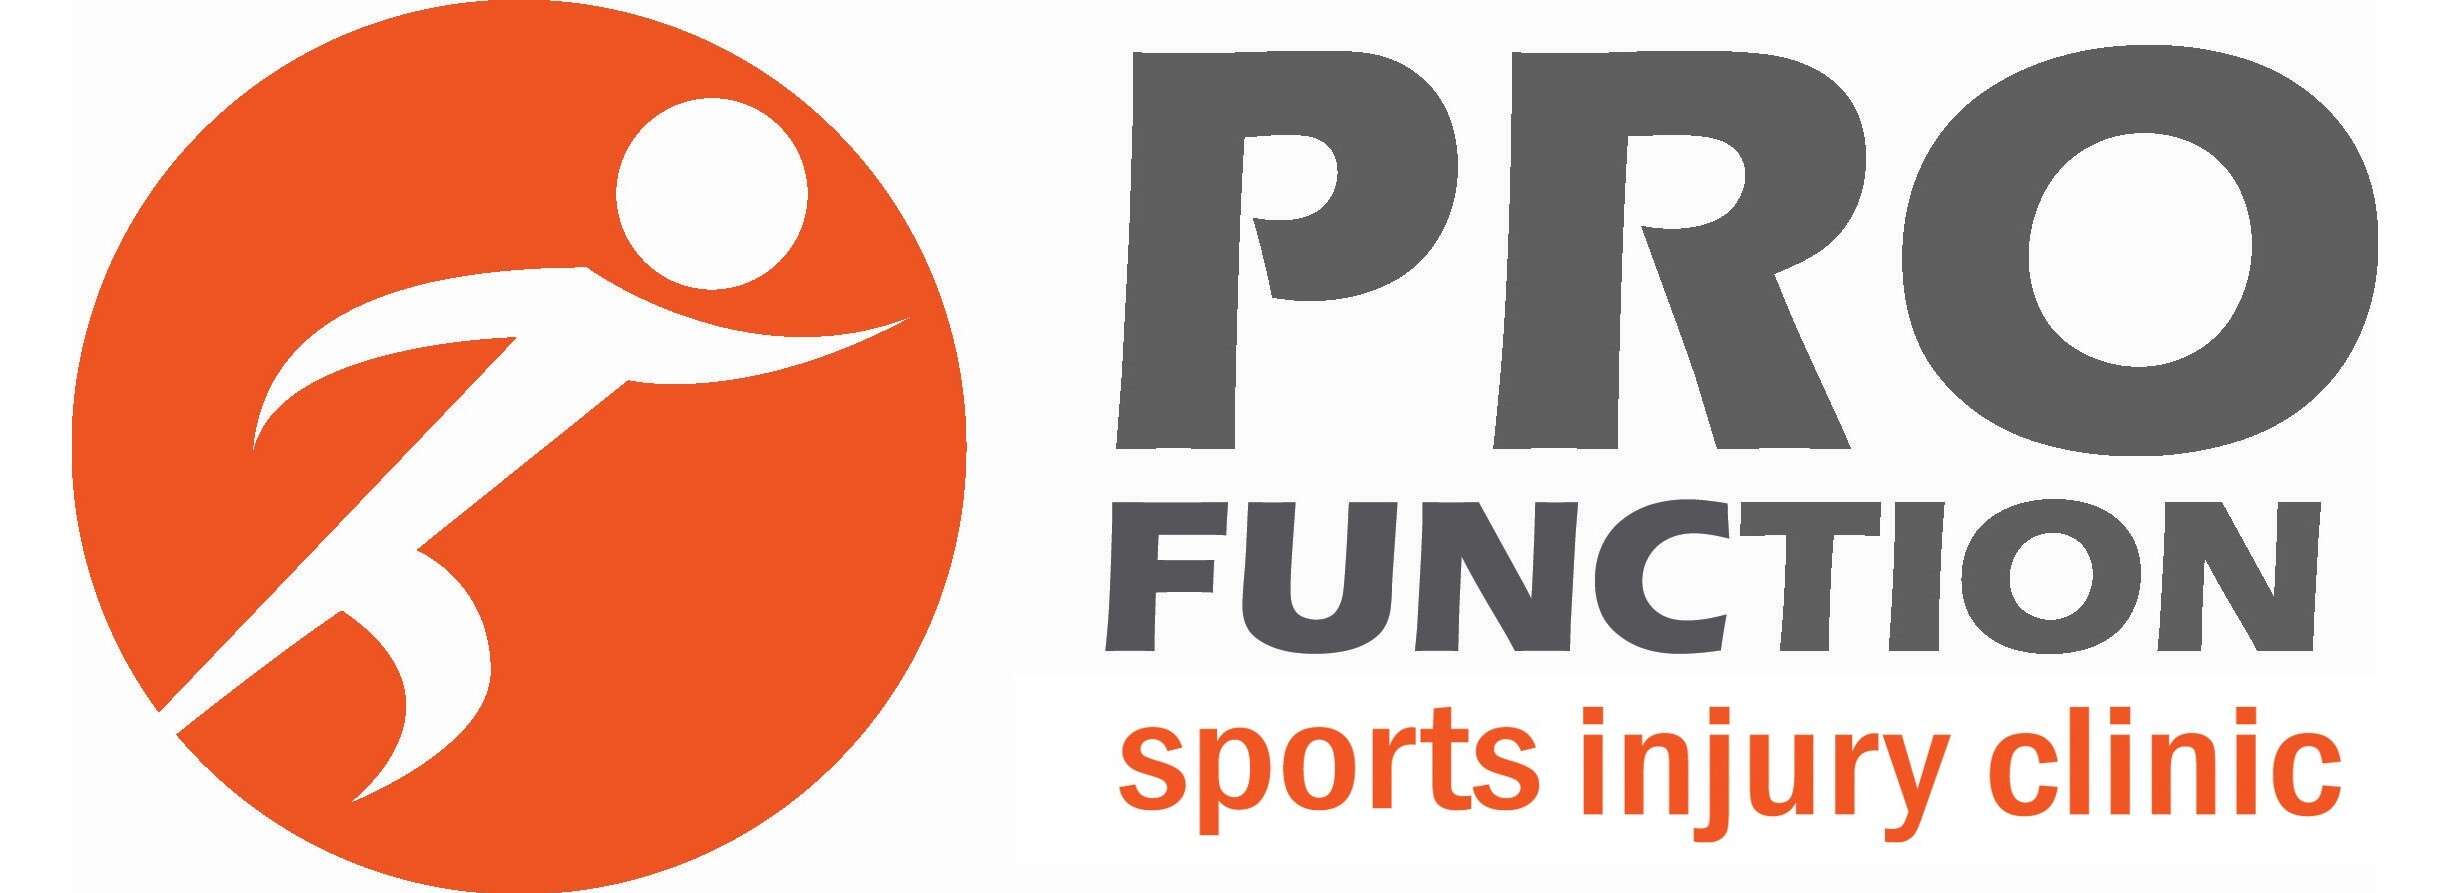 Pro Function - Sports Injury Clinic